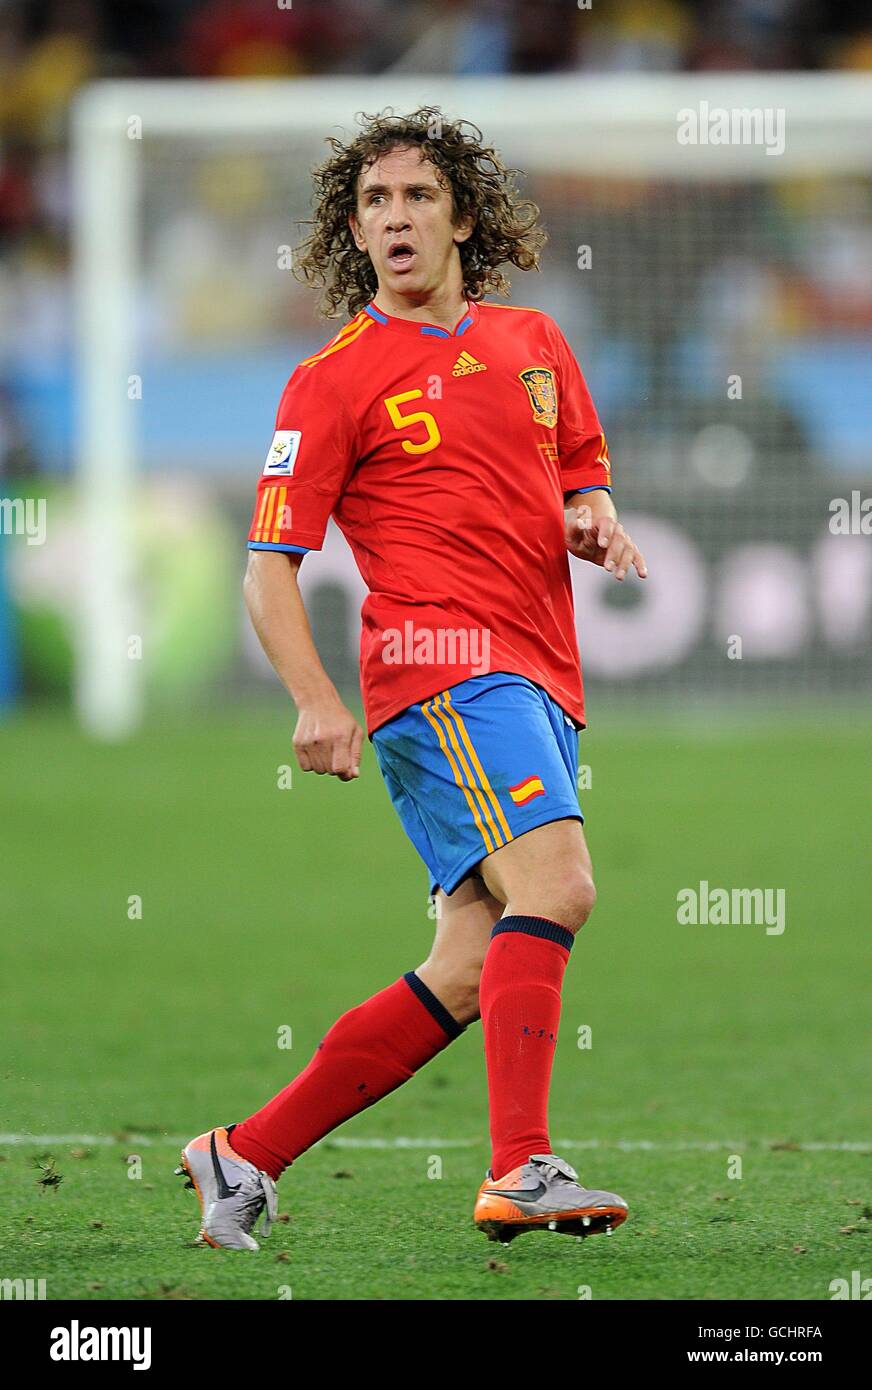 Soccer - 2010 FIFA World Cup South Africa - Group H - Switzerland v Spain - Durban Stadium. Carles Puyol, Spain Stock Photo